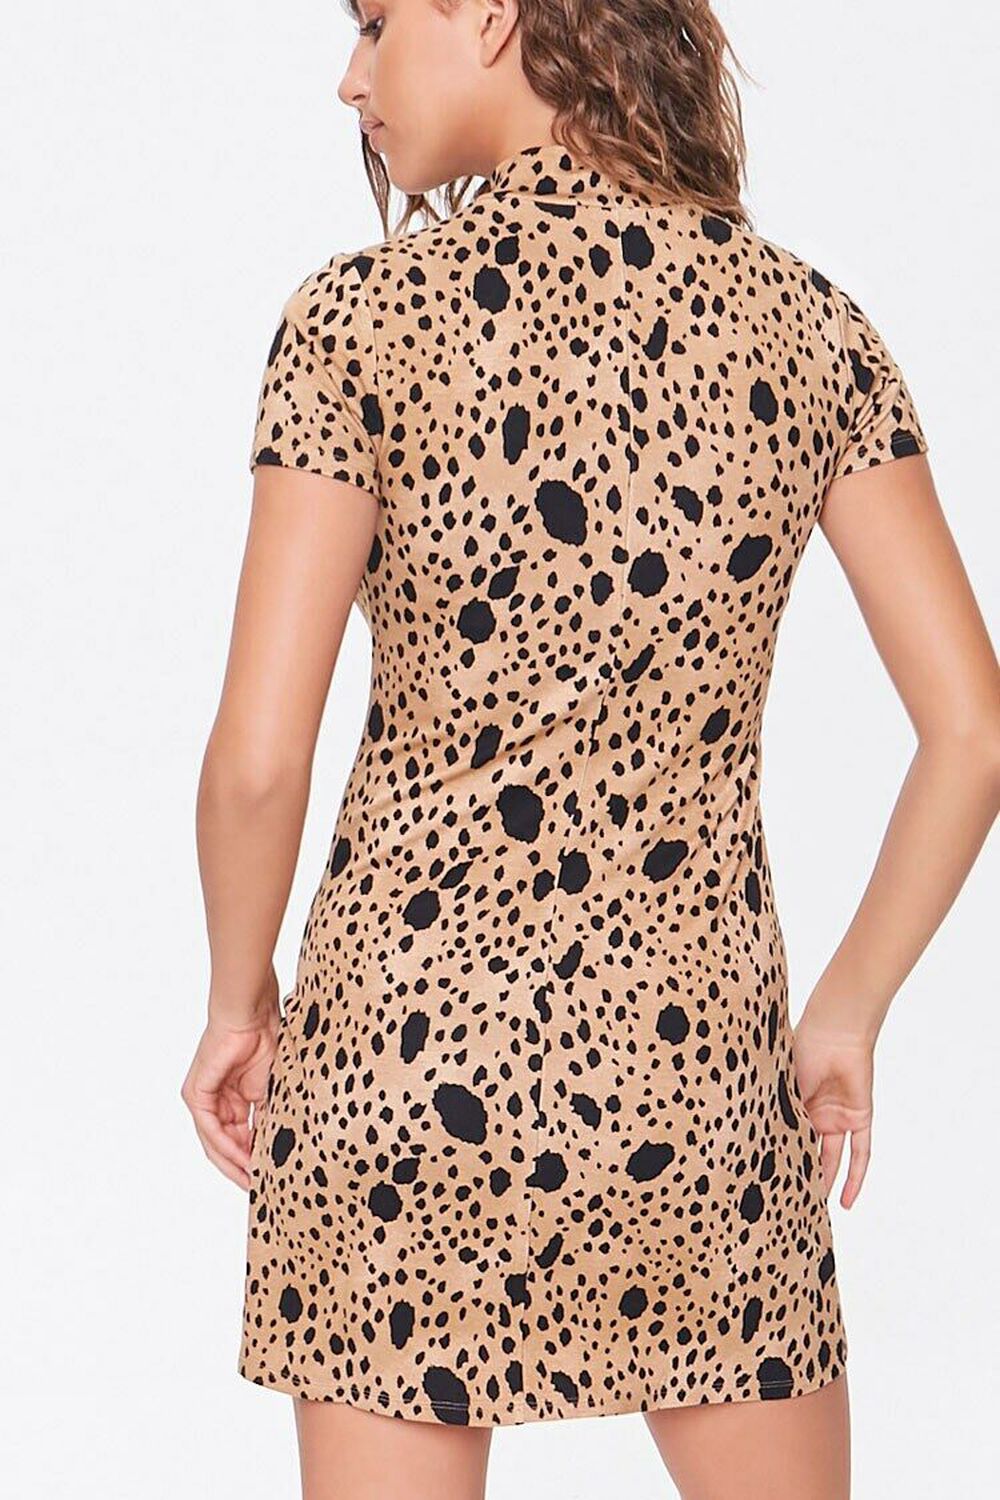 BROWN/BLACK Spotted Bodycon Dress, image 3